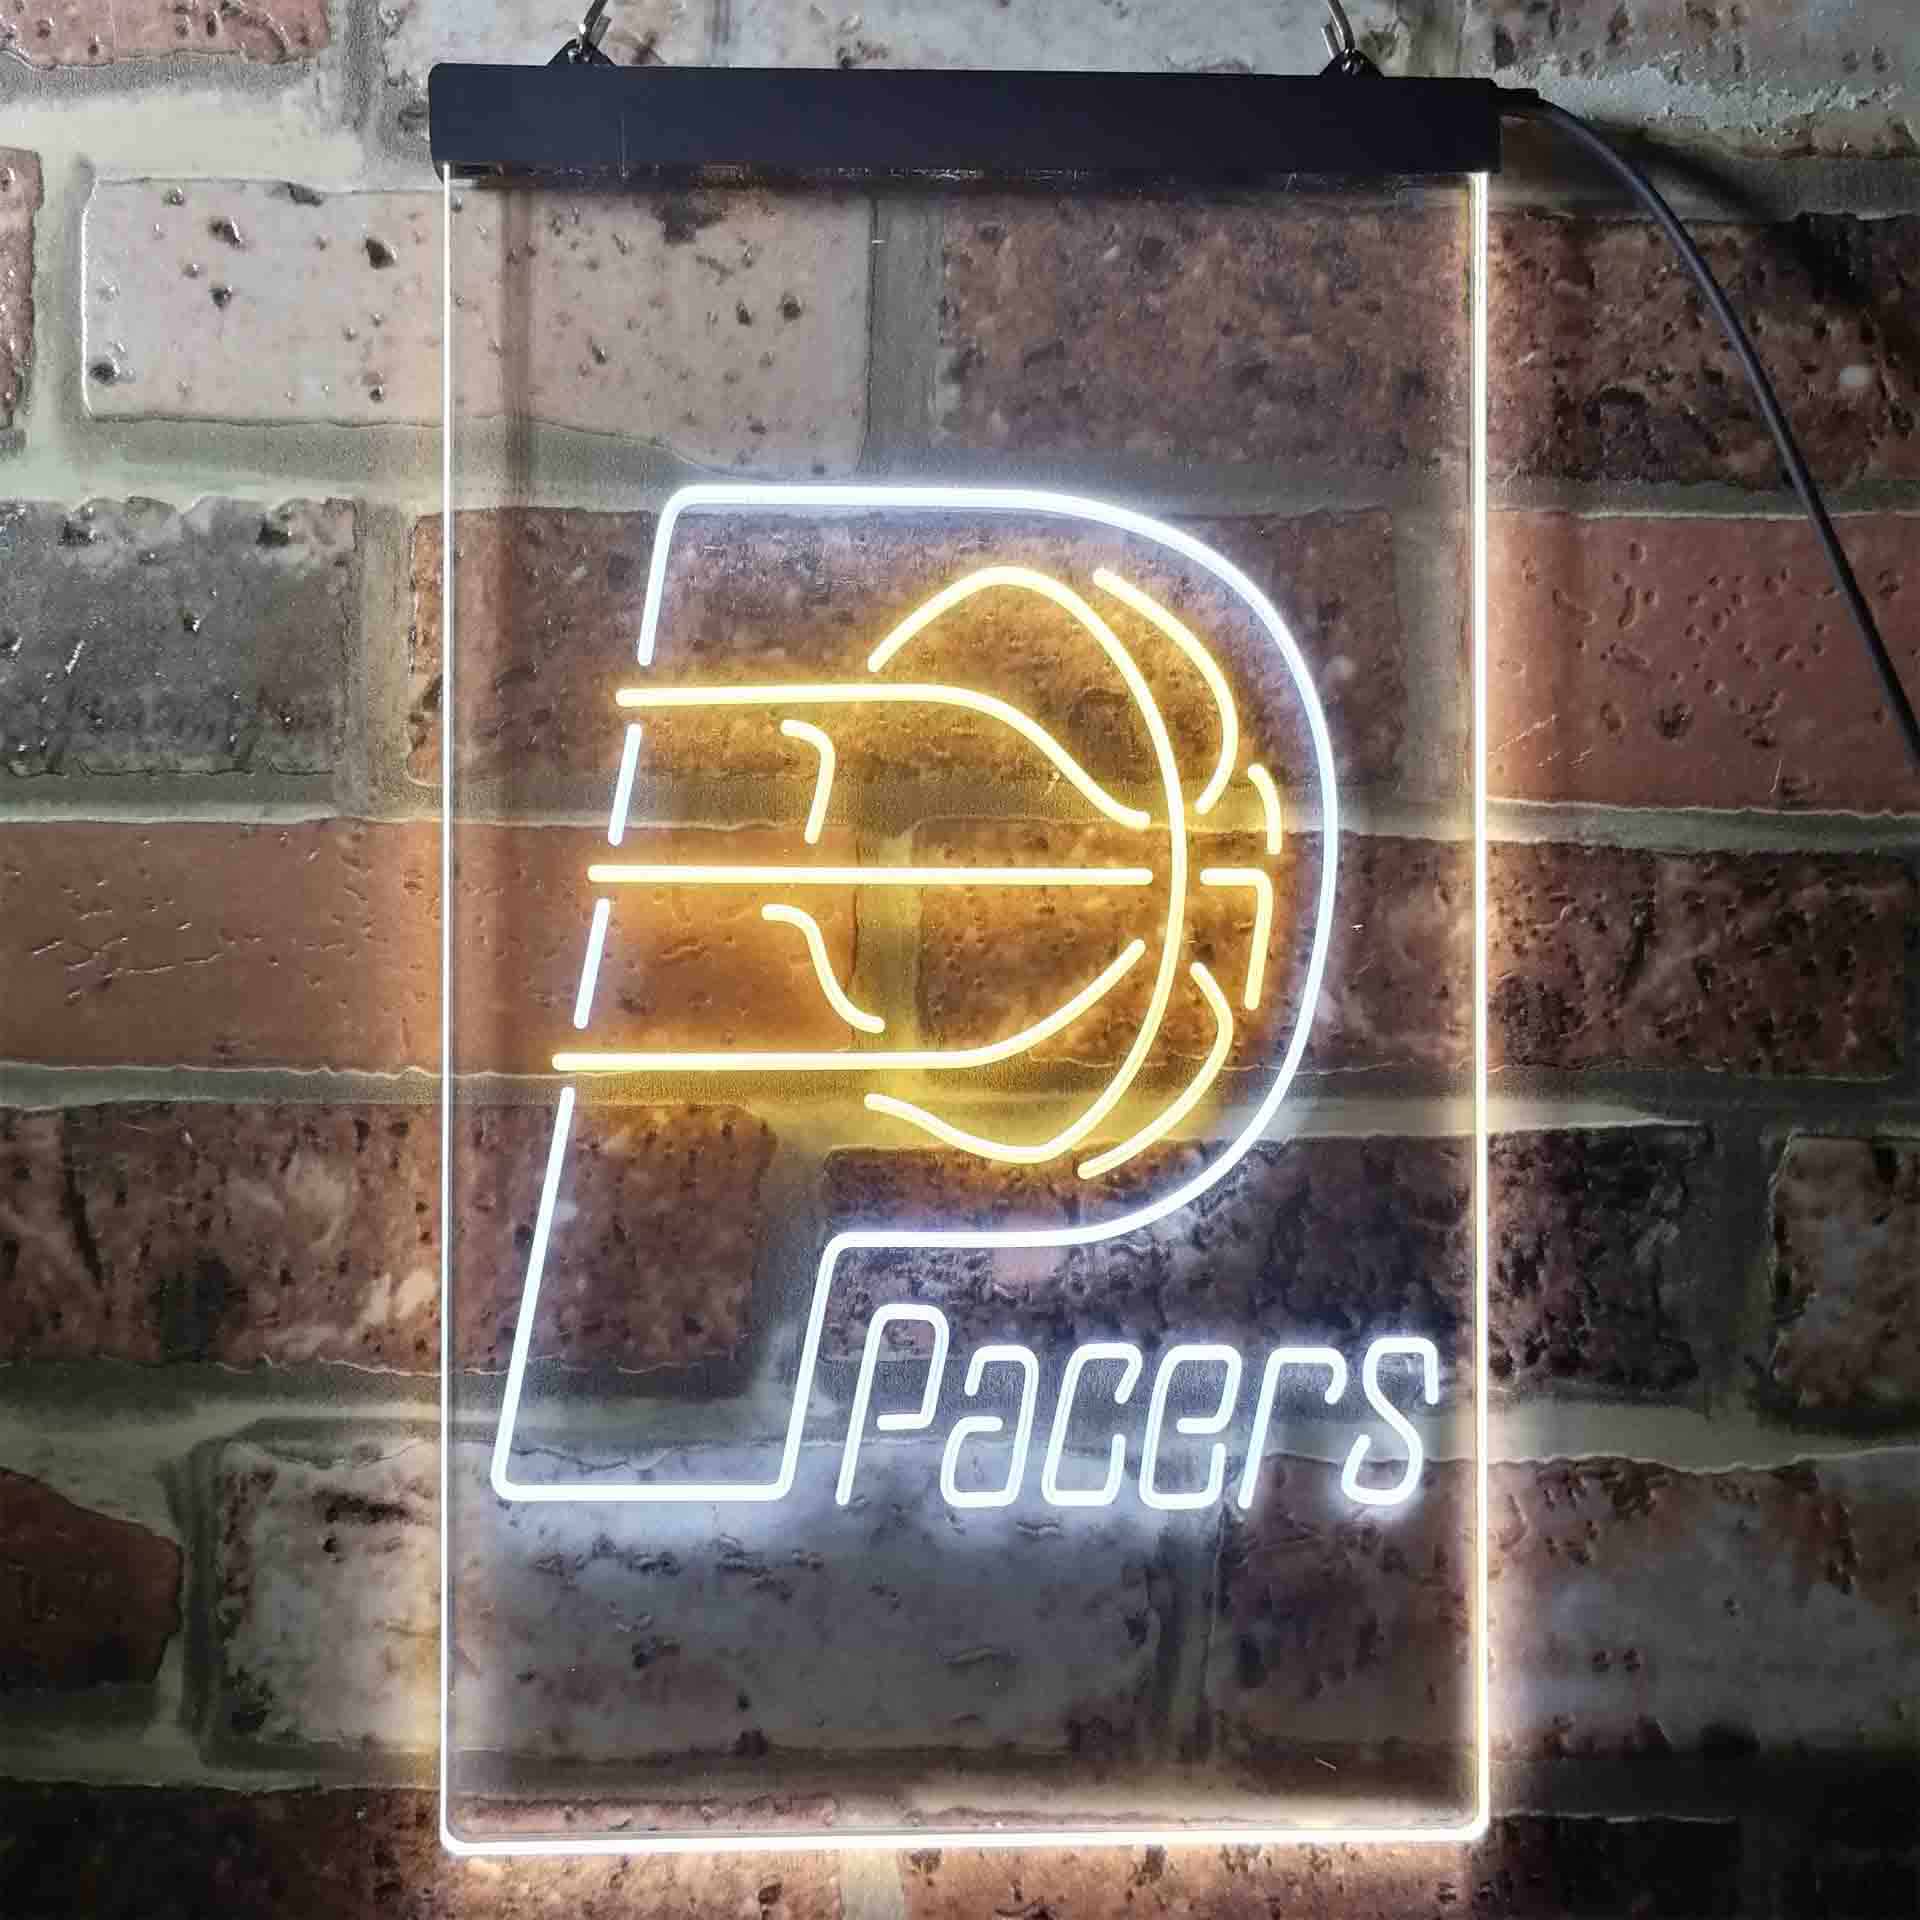 Indiana Pacers Neon-Like LED Sign